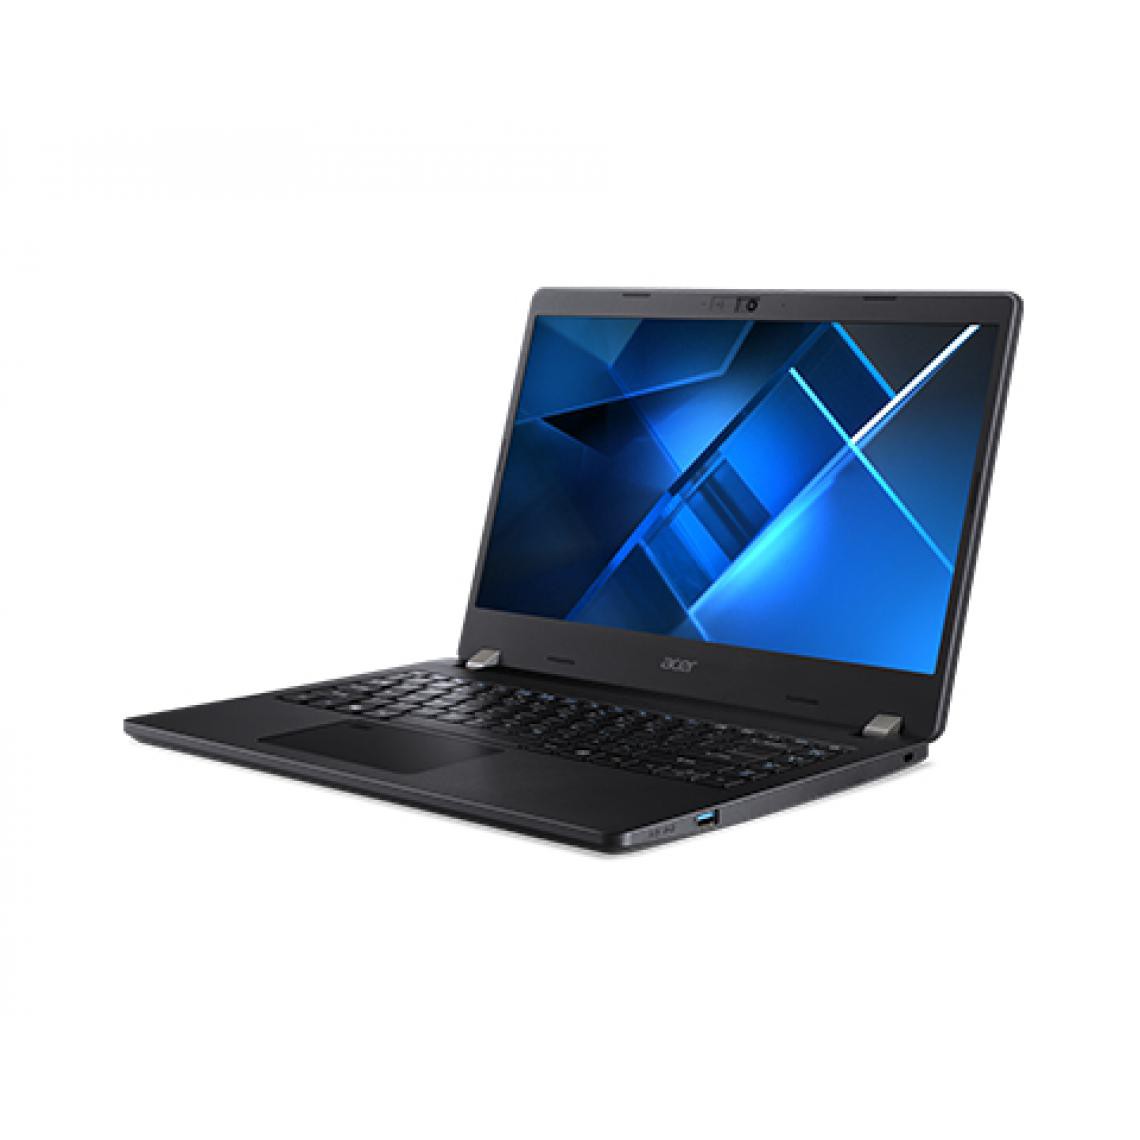 Acer - TMP214-53-5543 i5-1135G7 14p TMP214-53-5543 Intel Core i5-1135G7 14p FHD IPS 8Go 256Go PCIe NVMe SSD + Graphic Card Integrated W10P 3a - PC Portable